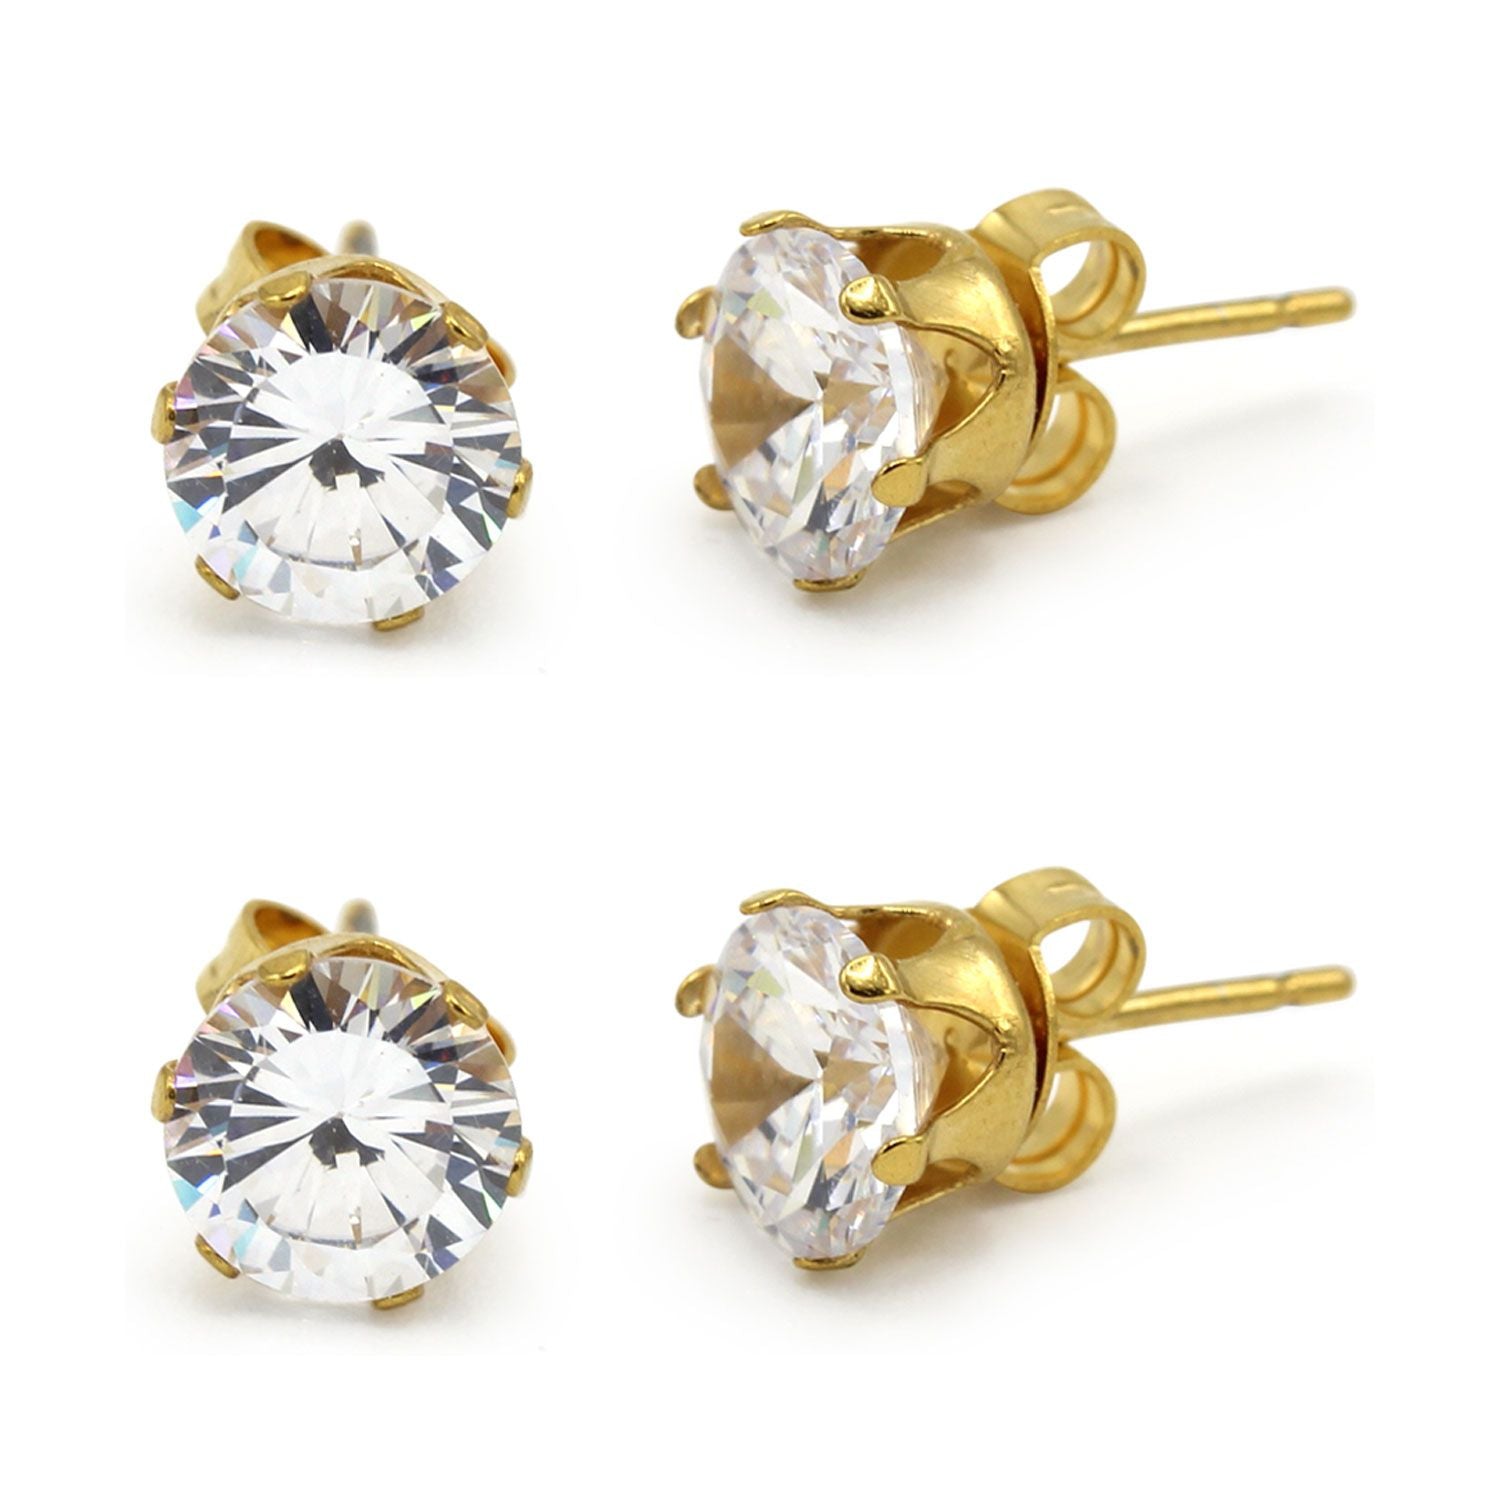 Cubic Zirconia Round 14K Gold Plated Stud Earrings Set Of 2 Stainless Steel Jewelry Men Women